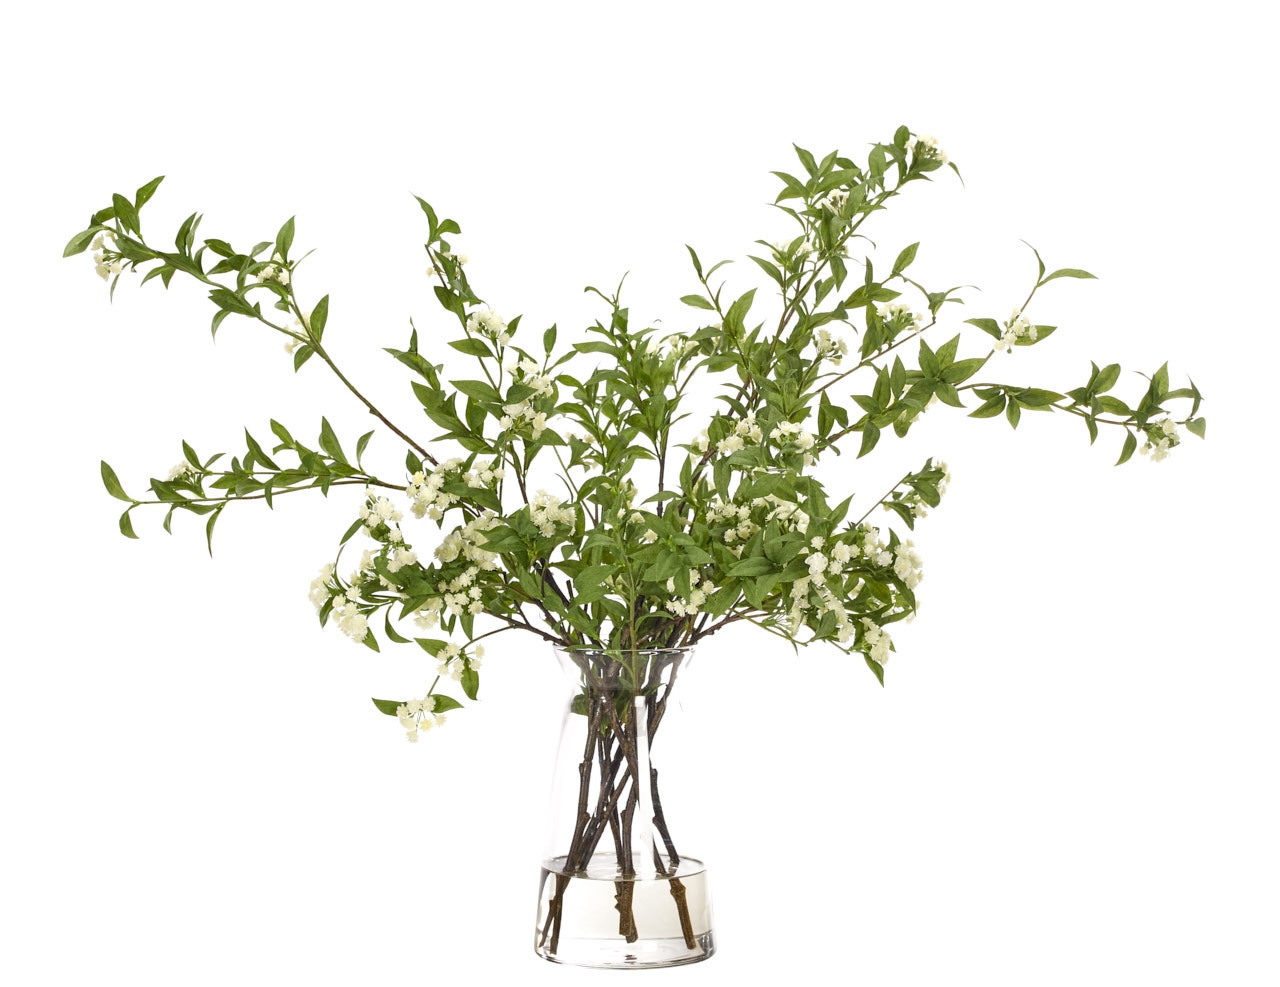 12 Amazing Branches for Large Vases 2024 free download branches for large vases of spiraea branch white cinched glass vase 30wx20dx24h with 2cc831191a07aab801eac0ba8b63